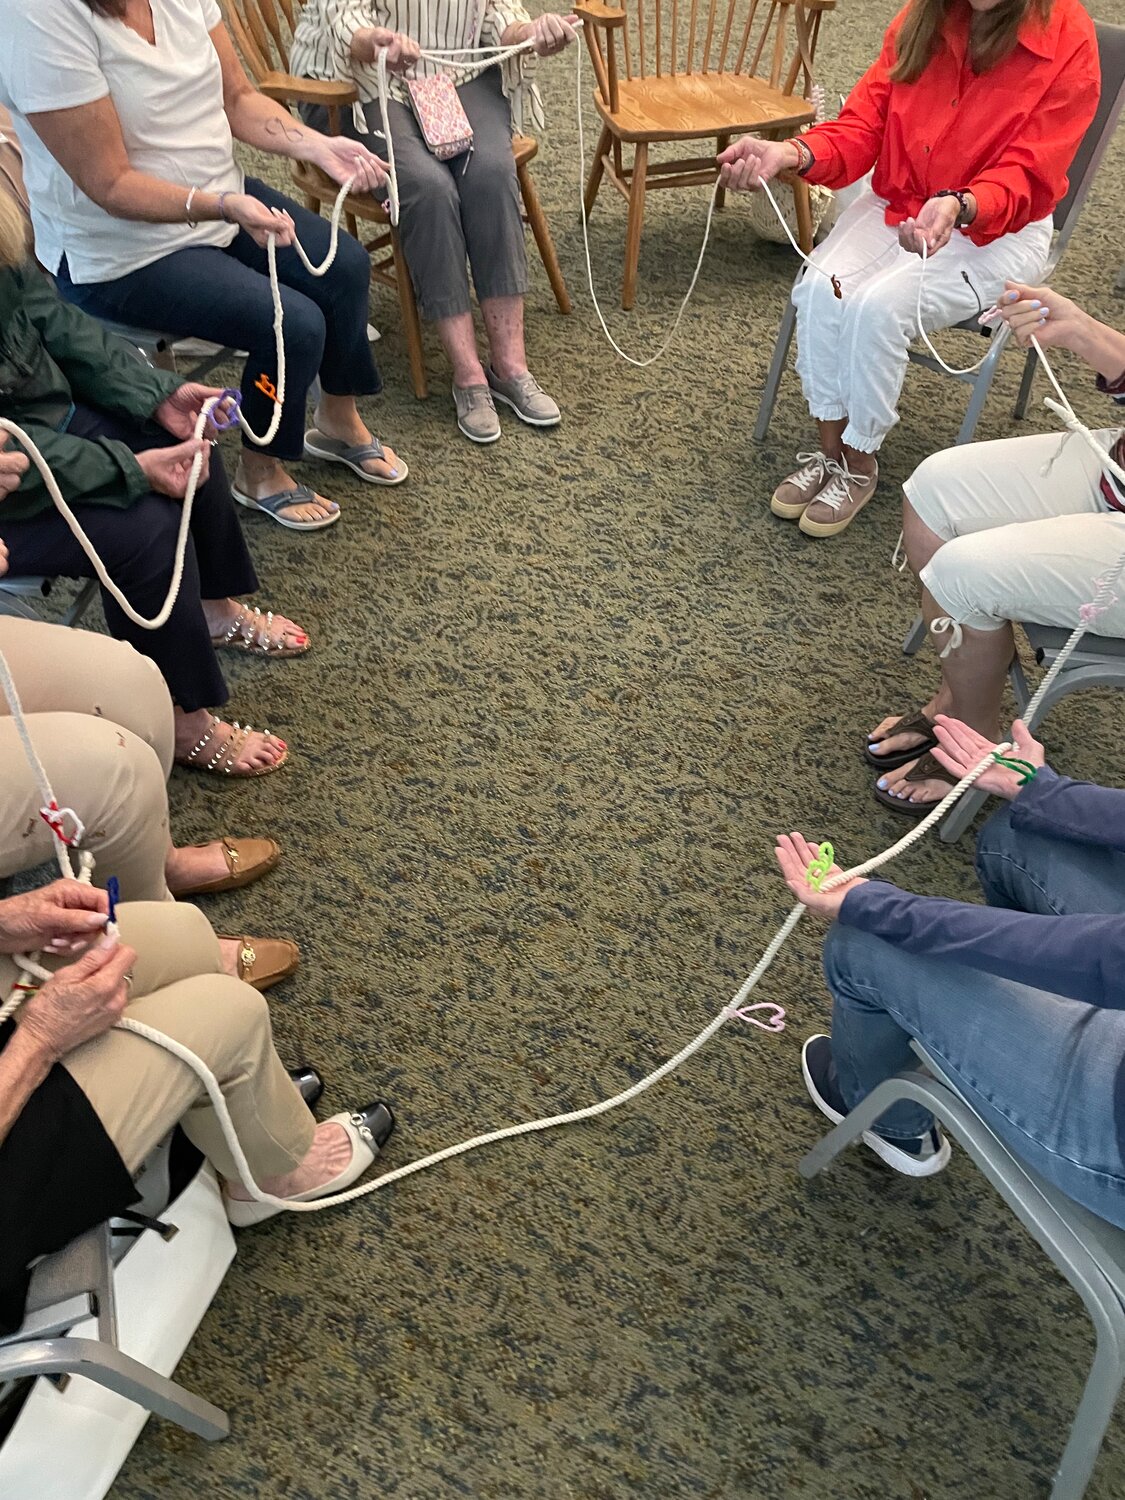 The group holds a rope each meeting to signify their connection.